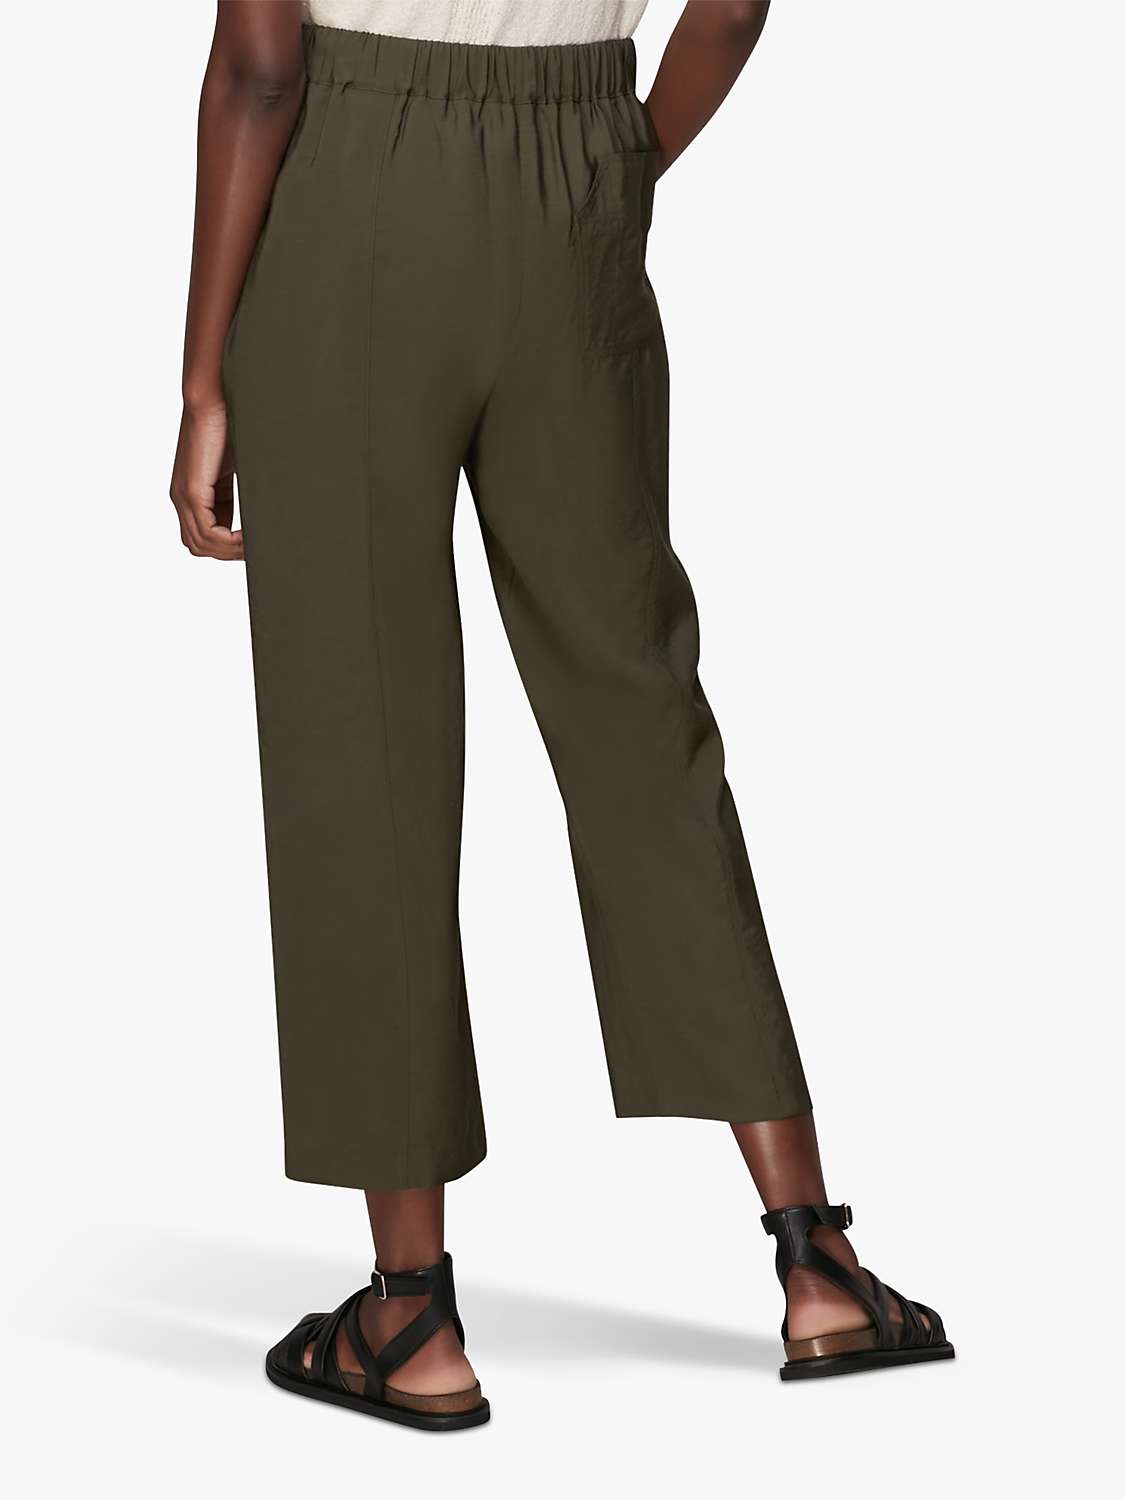 Buy Whistles Easy Casual Trousers, Khaki Online at johnlewis.com